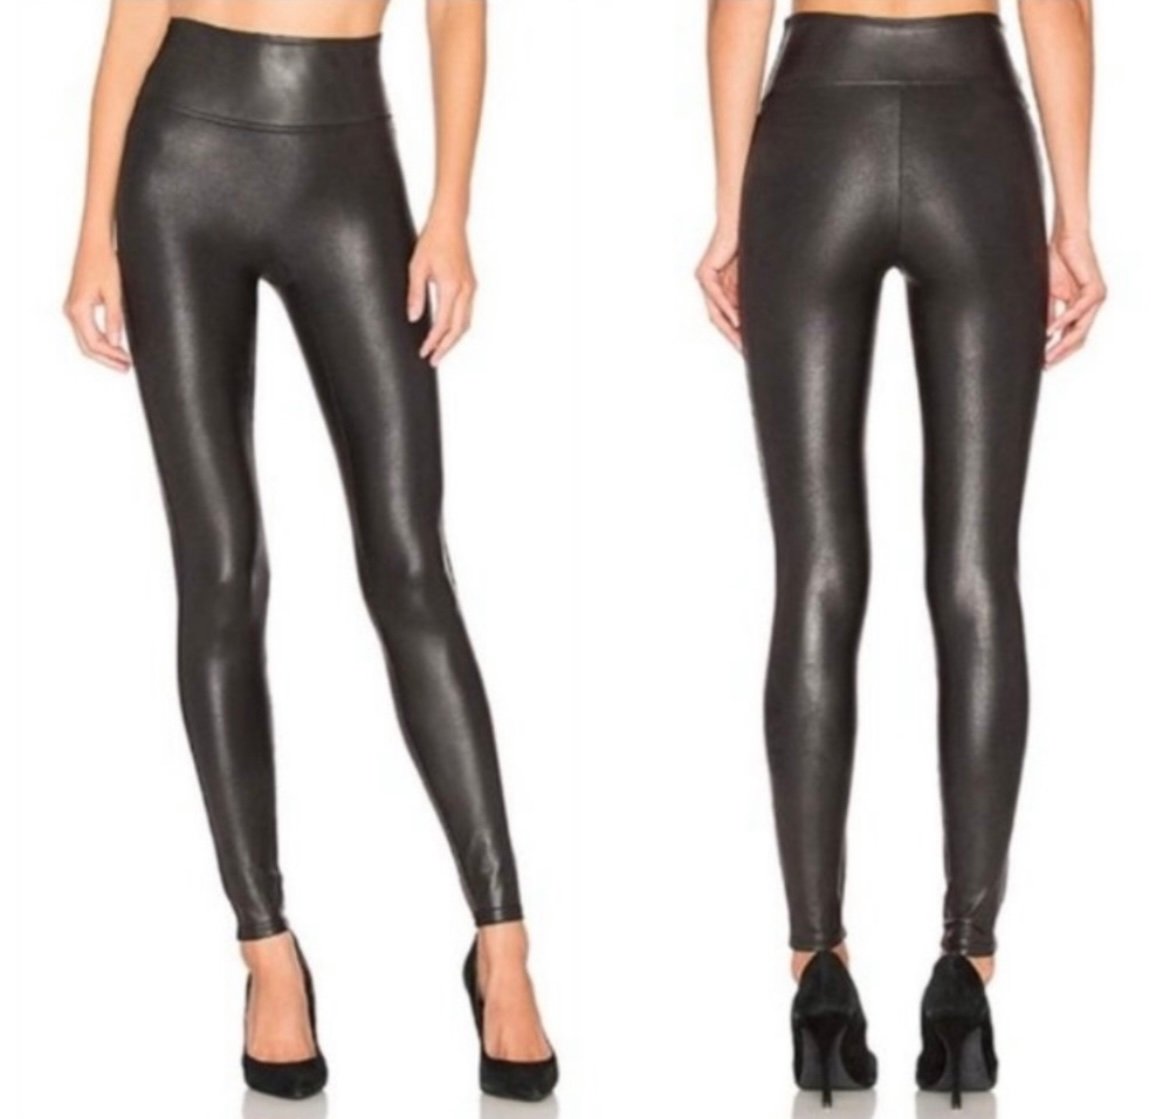 big discount Spanx faux leather leggings black Ozm0yIVov Factory Price